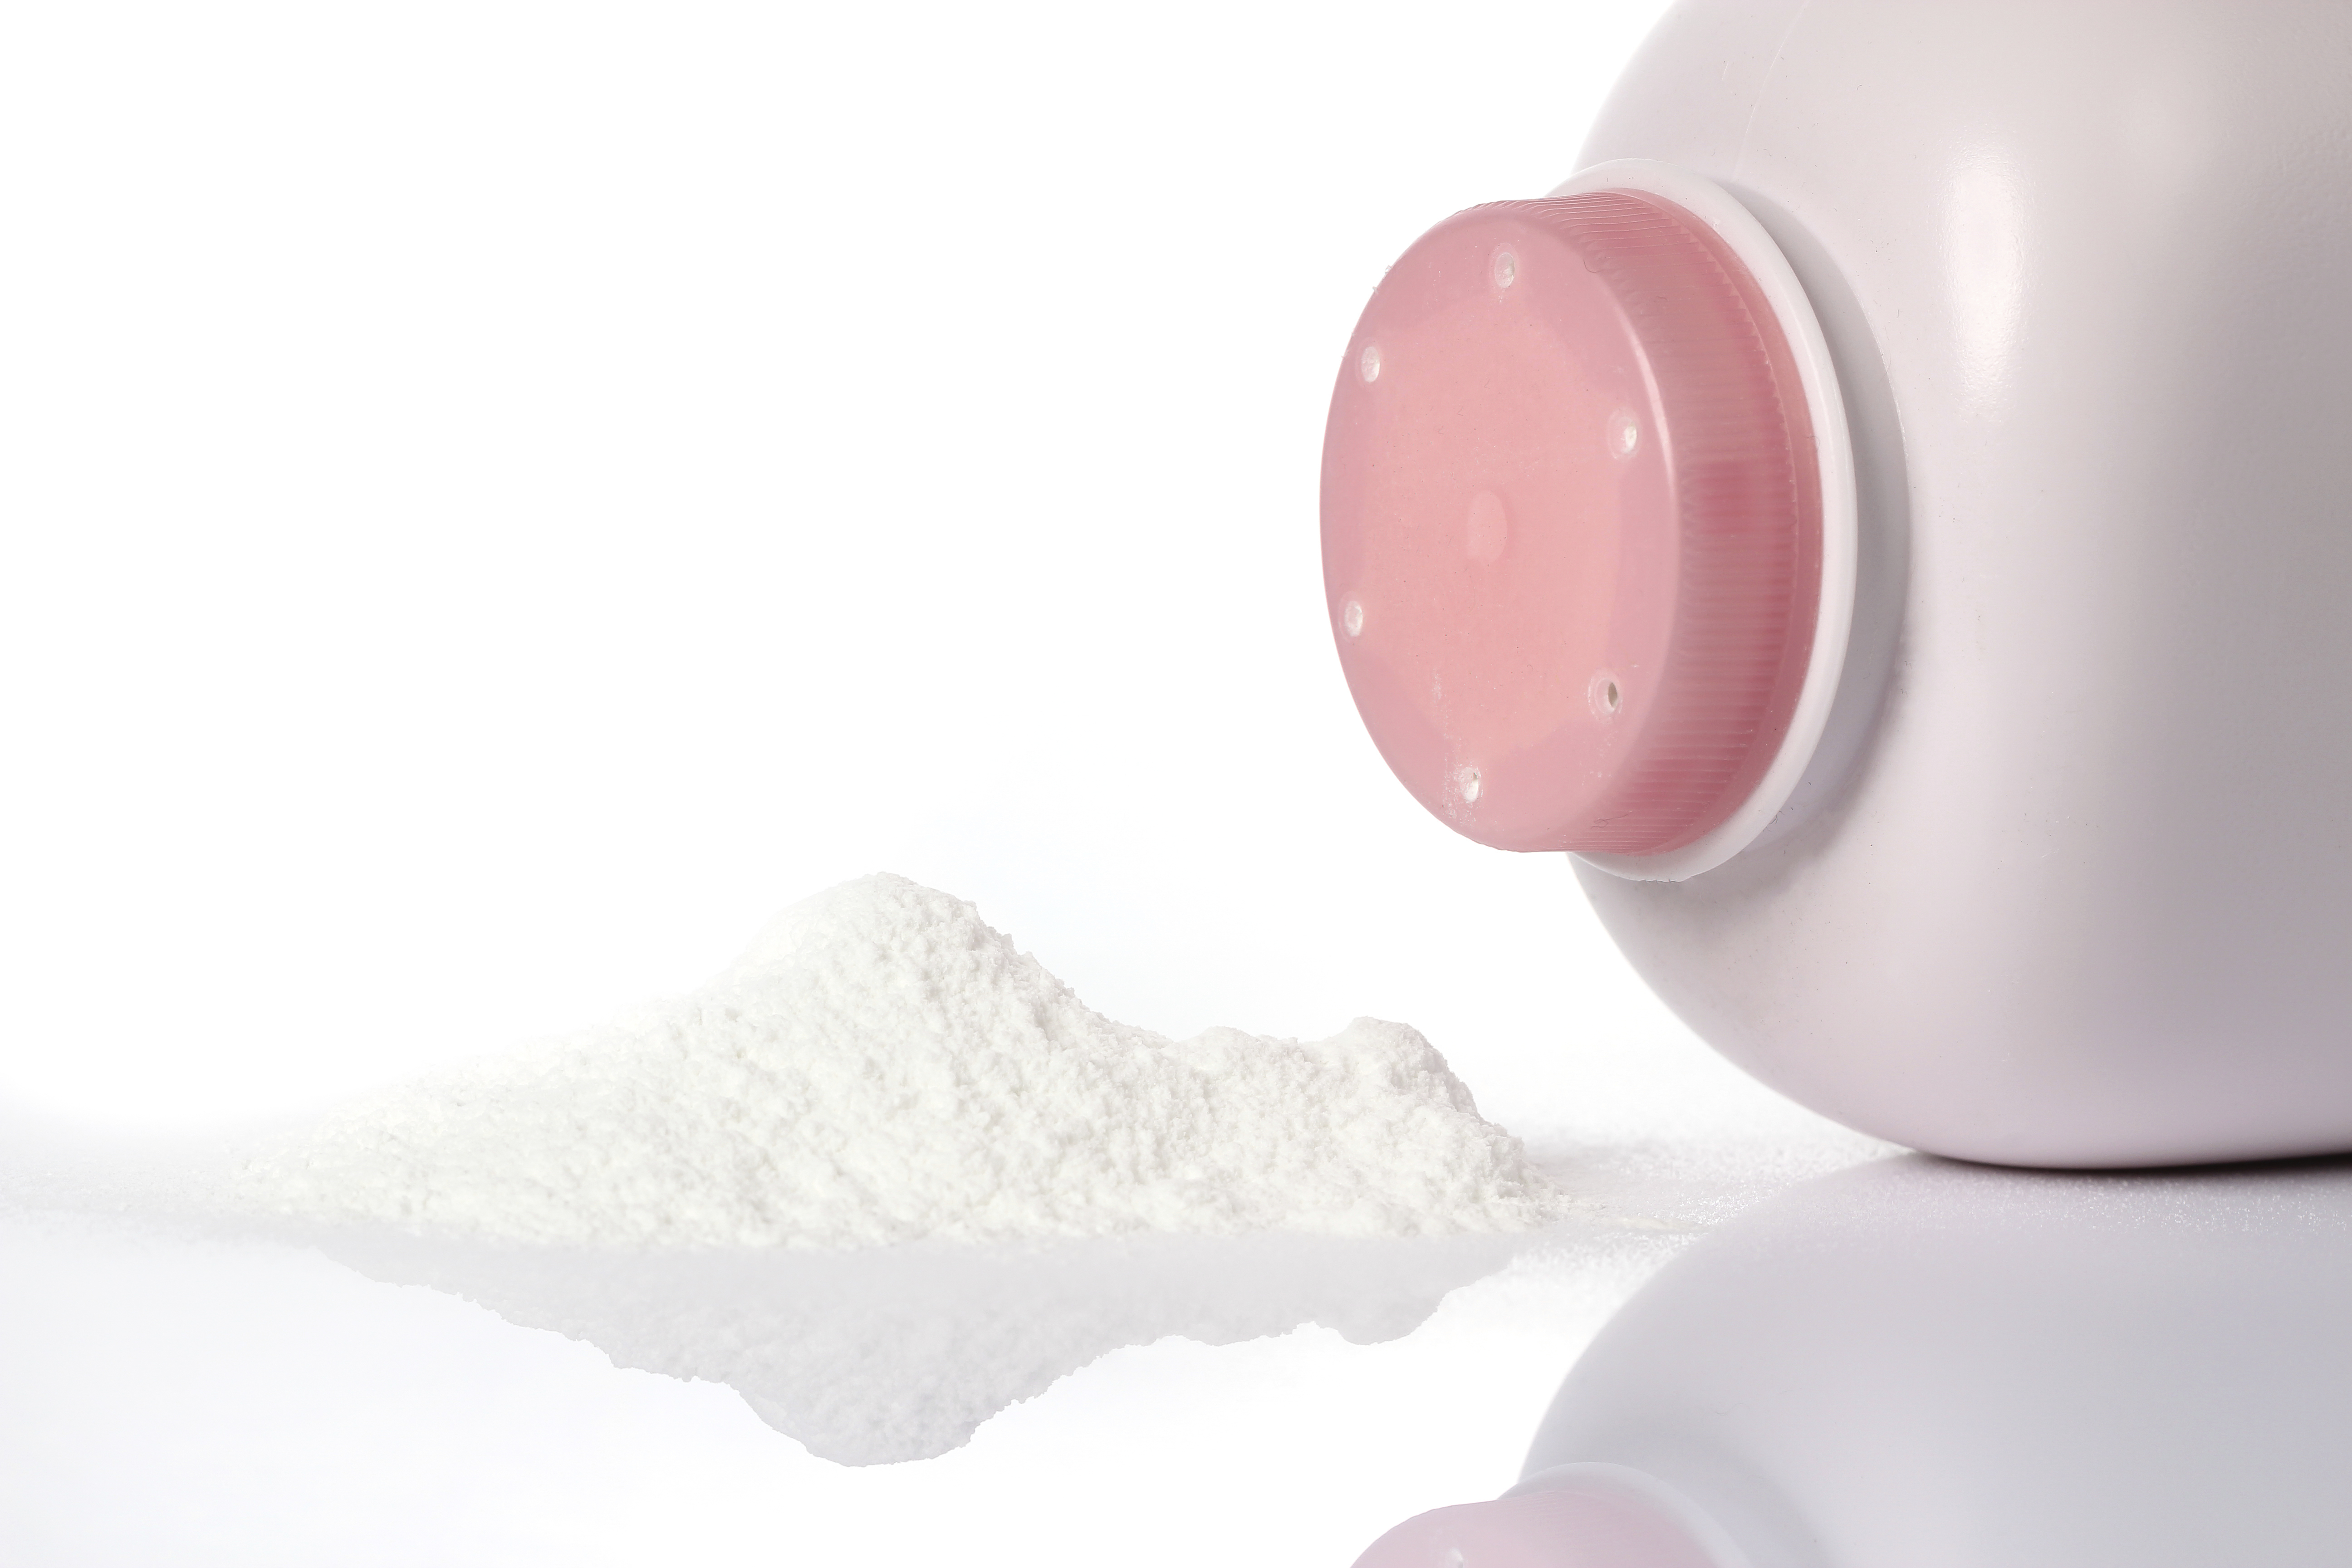 Johnson & Johnson to end sales of baby powder with talc globally